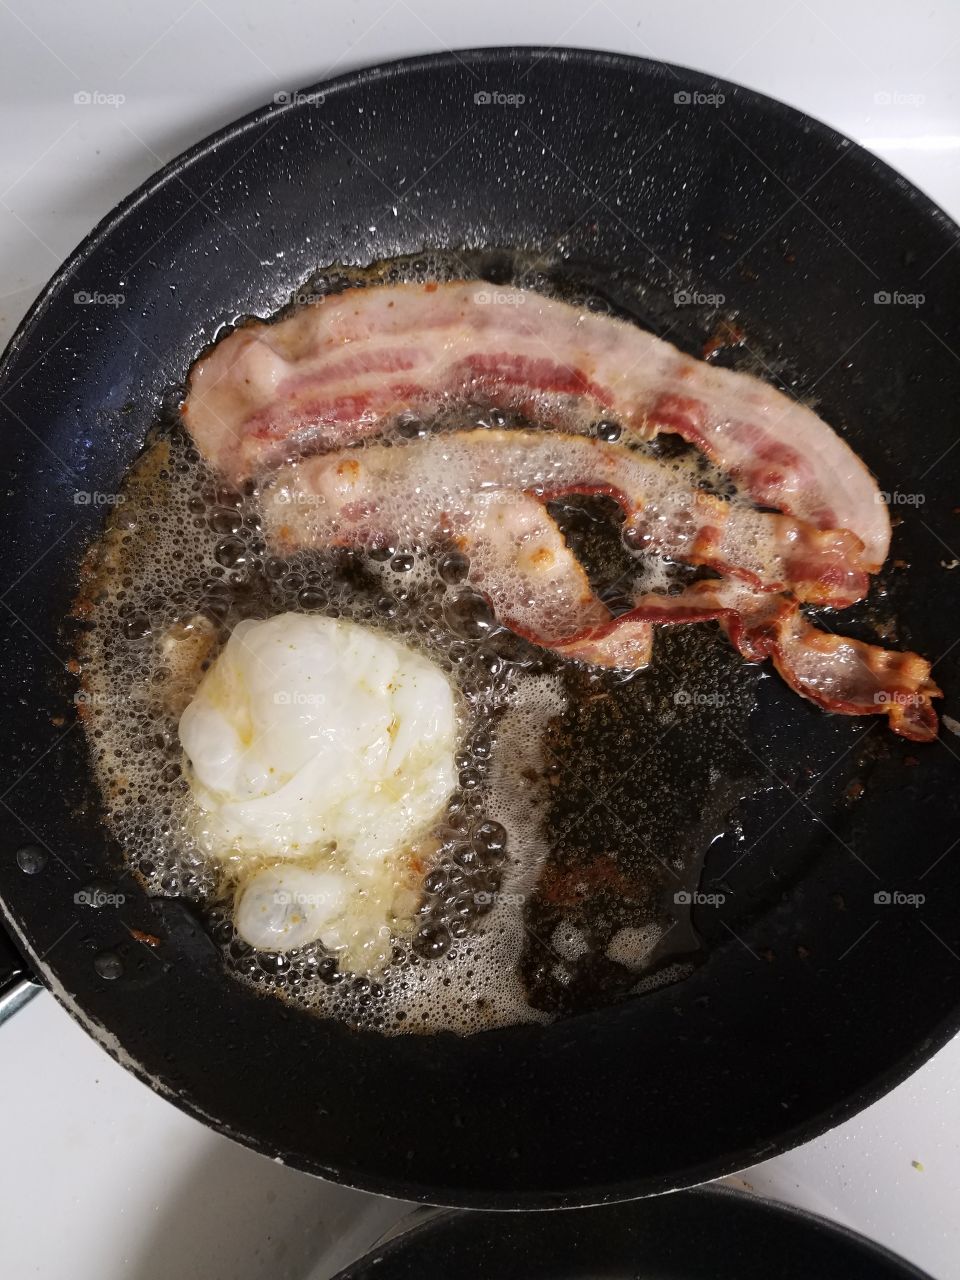 Bacon and egg